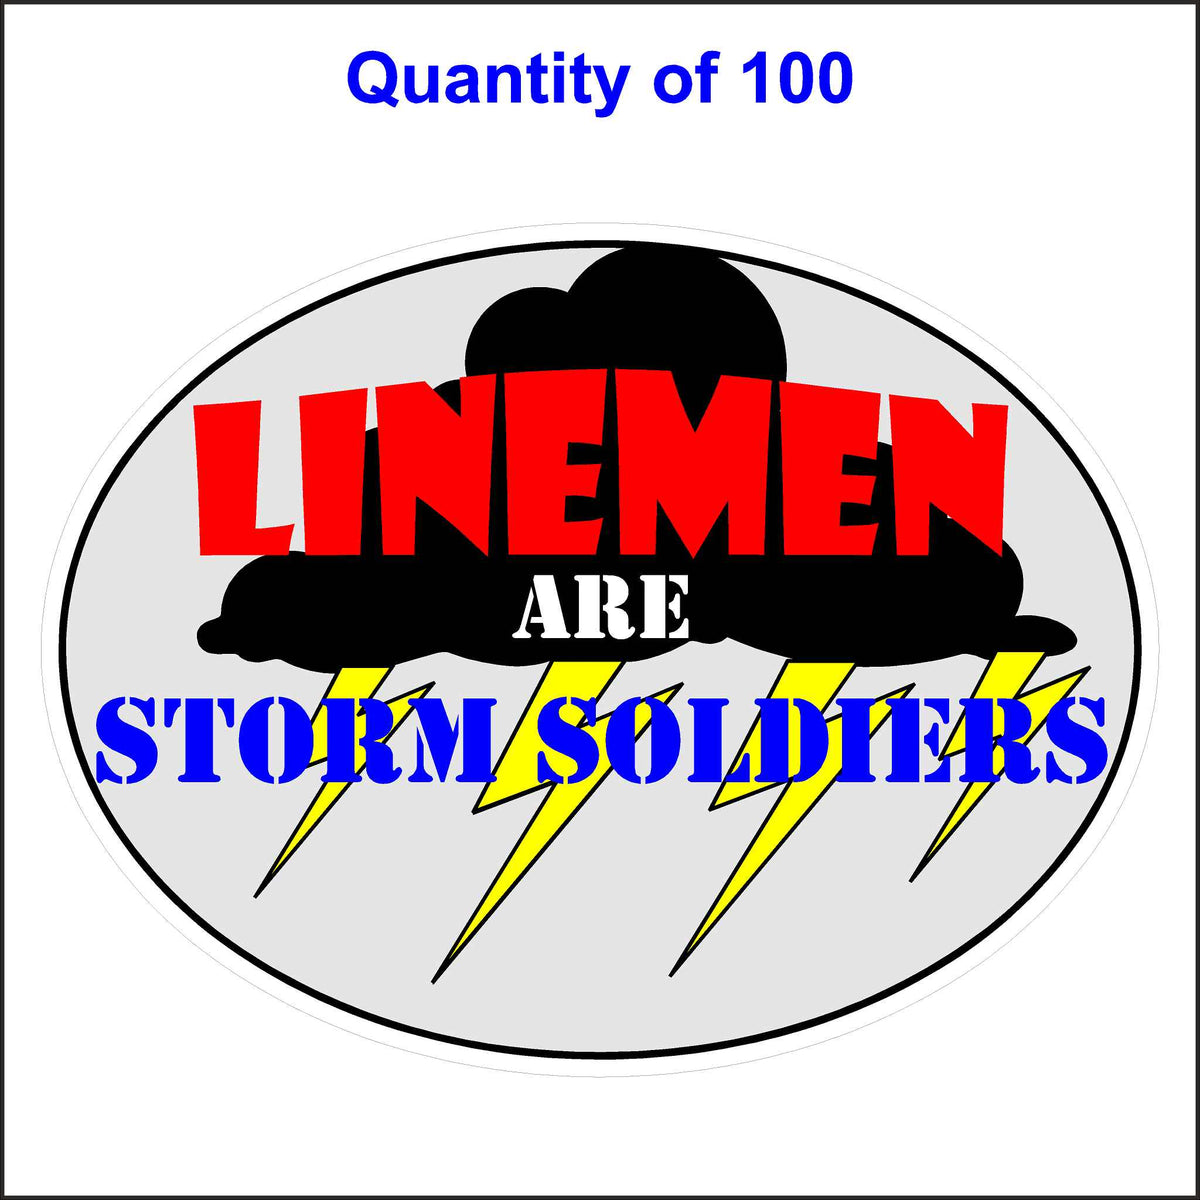 Gray Lineman Are Storm Soldiers Stickers. 100 Quantity.